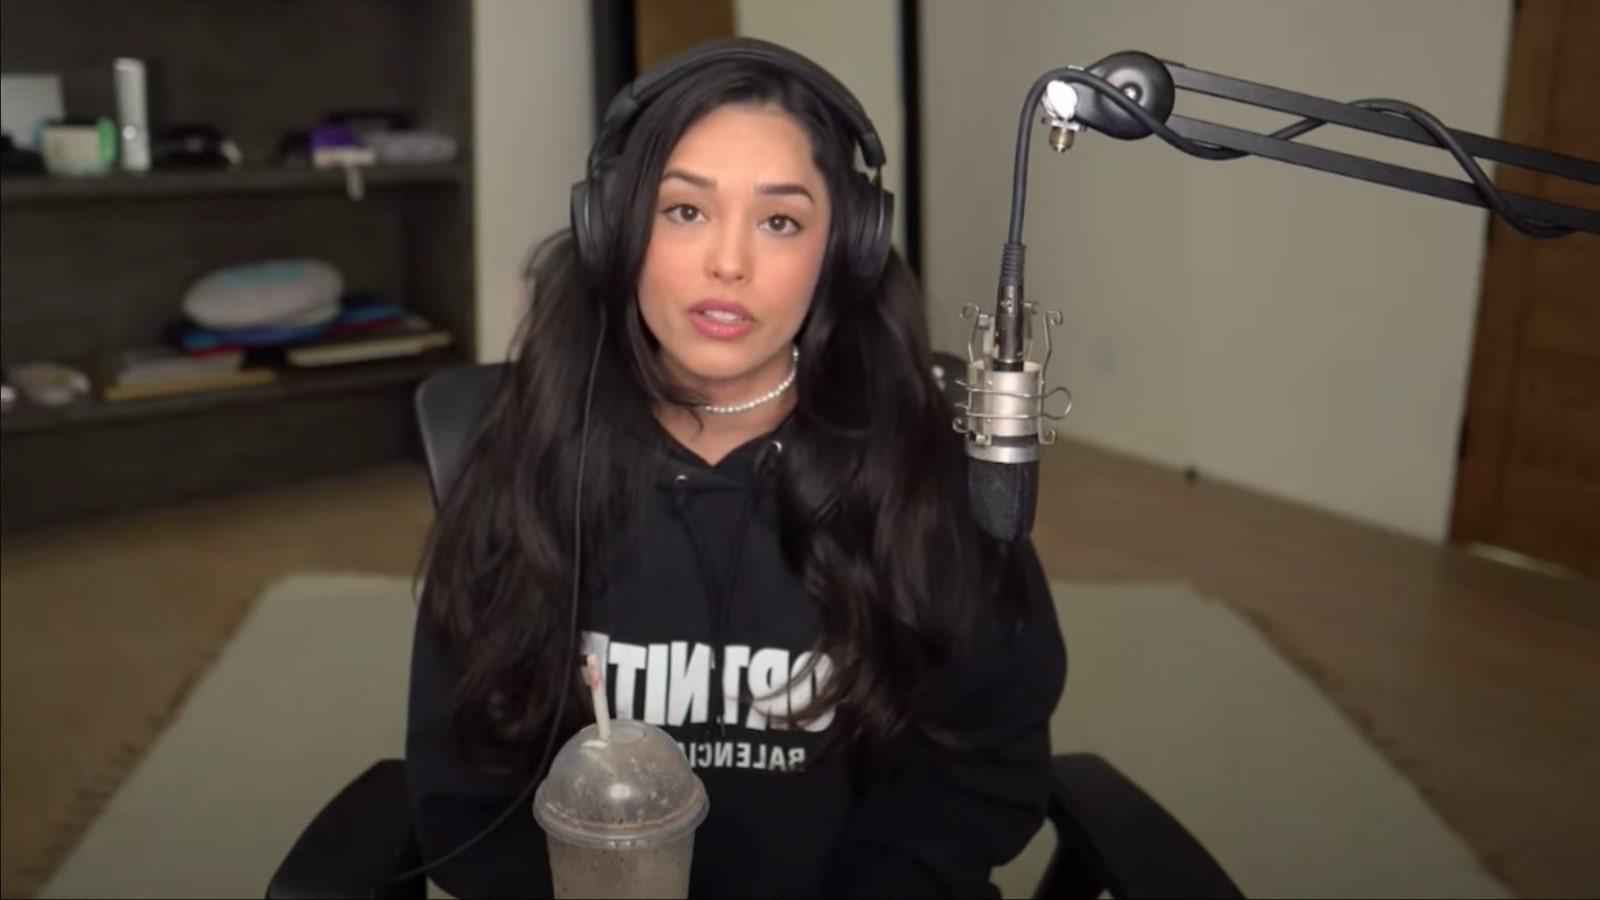 Image of Valkyrae on her recent YT video